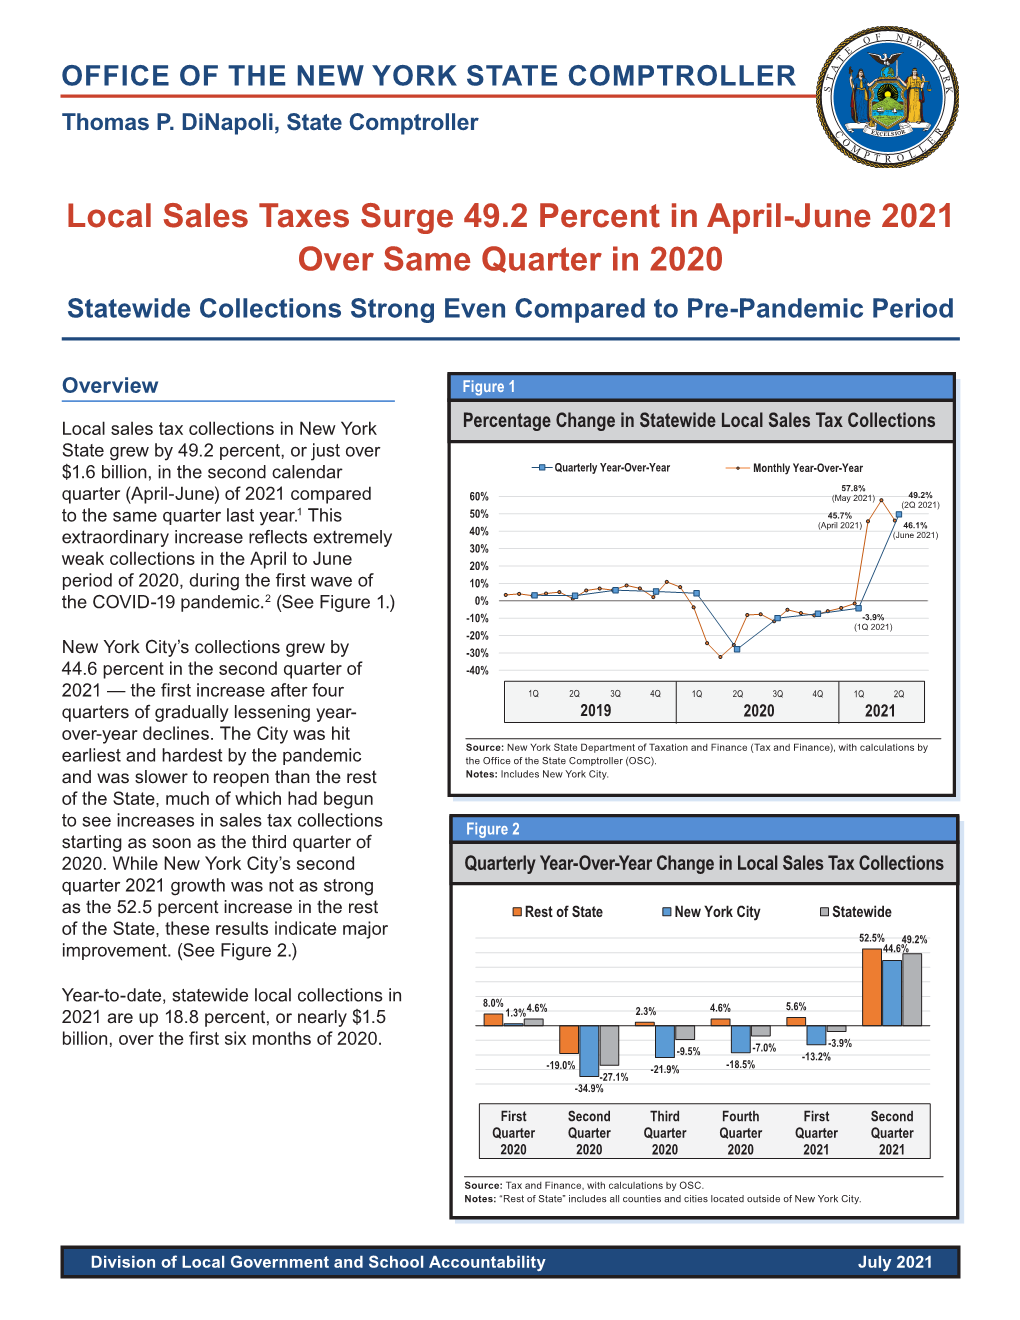 Local Sales Taxes Surge 49.2 Percent in April-June 2021 Over Same Quarter in 2020 Statewide Collections Strong Even Compared to Pre-Pandemic Period